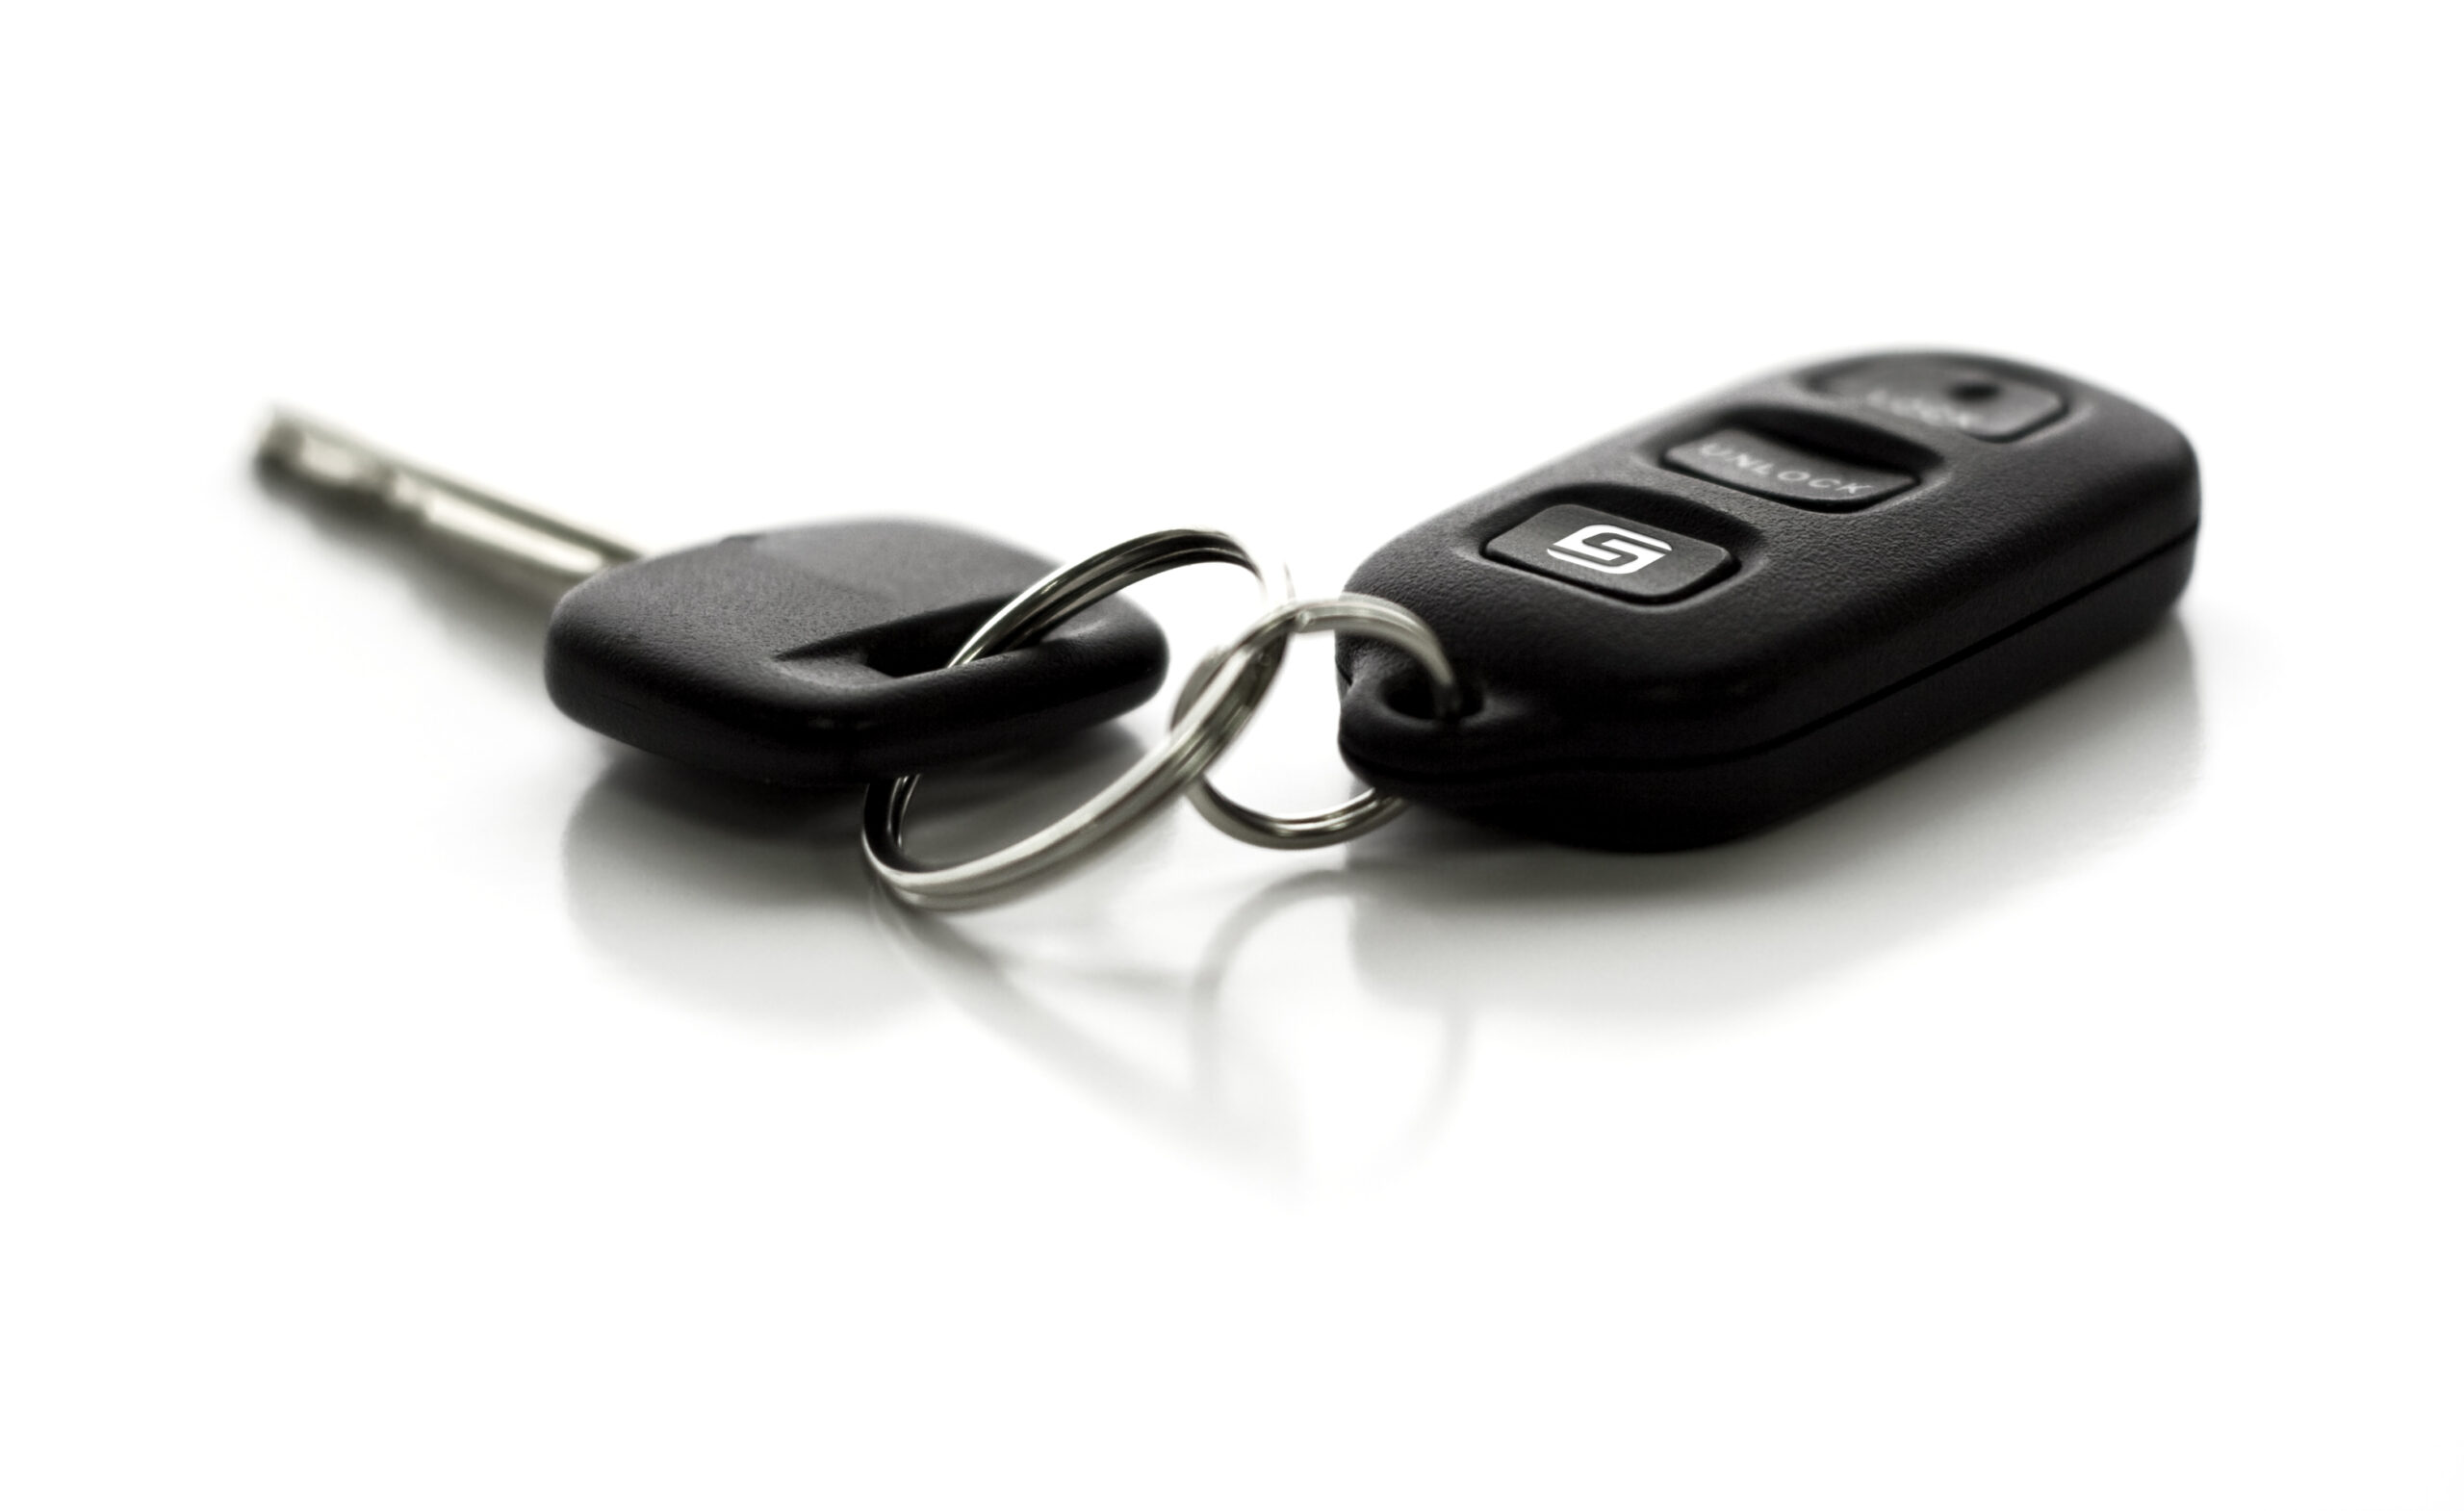 A car key with remote control.  Functions include Lock, Unlock, and Hatch Glass.  Narrow depth of field with focus on closest portion of key and remote.  Isolated on white background.